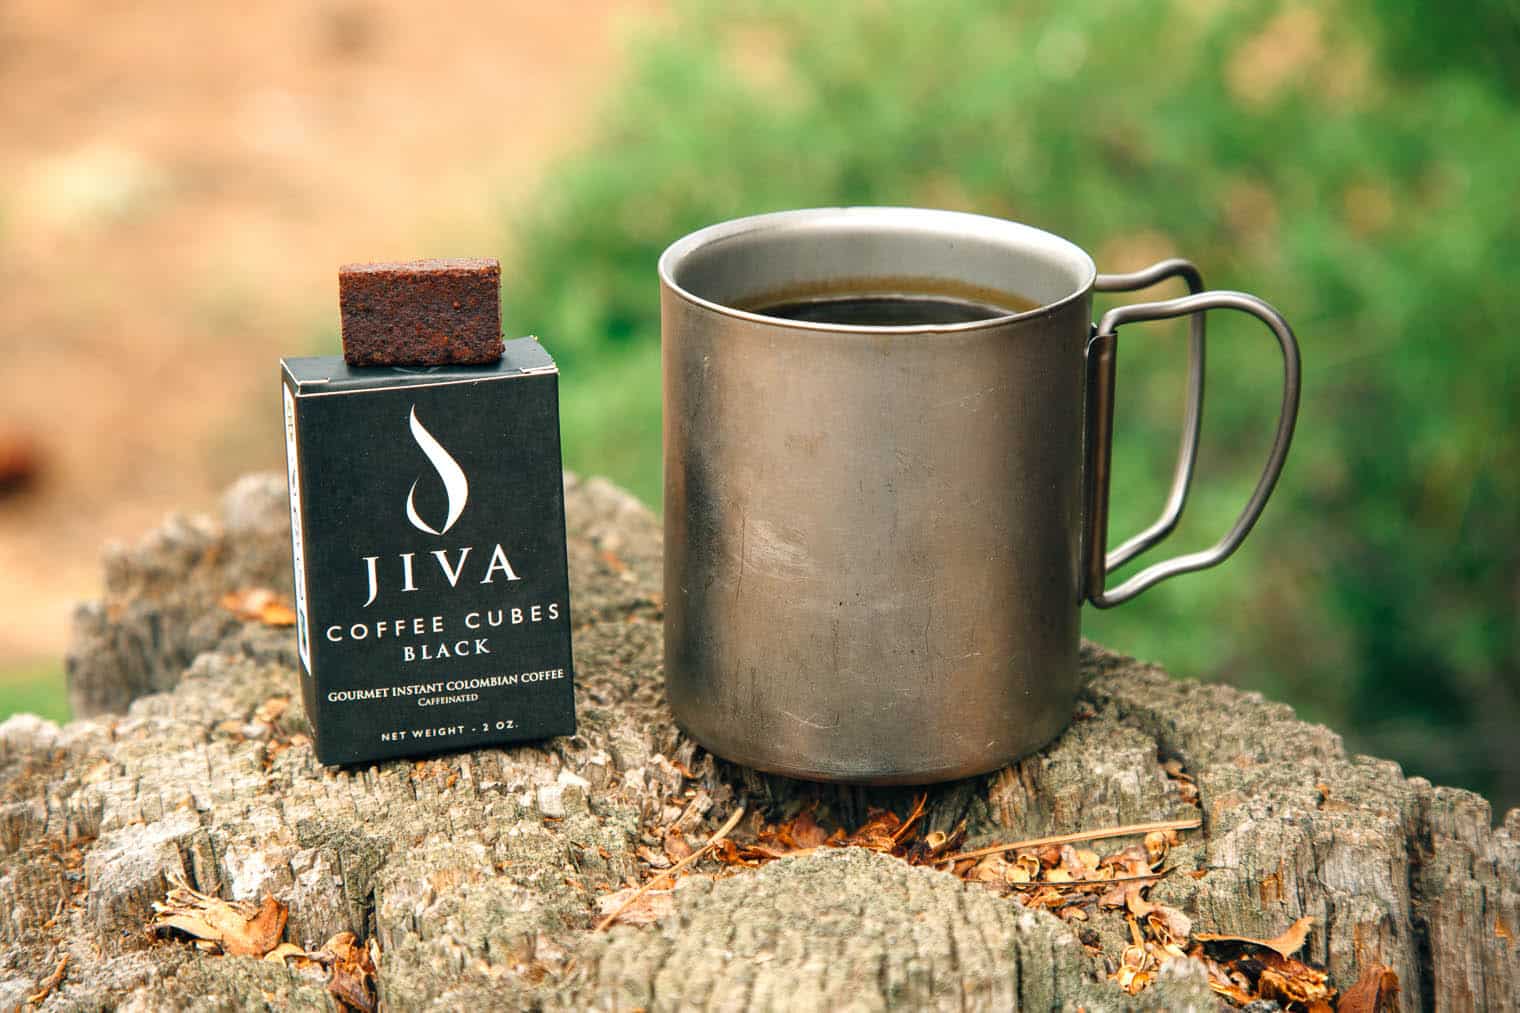 Jiva Cube  instant coffee packaging next to a camp mug